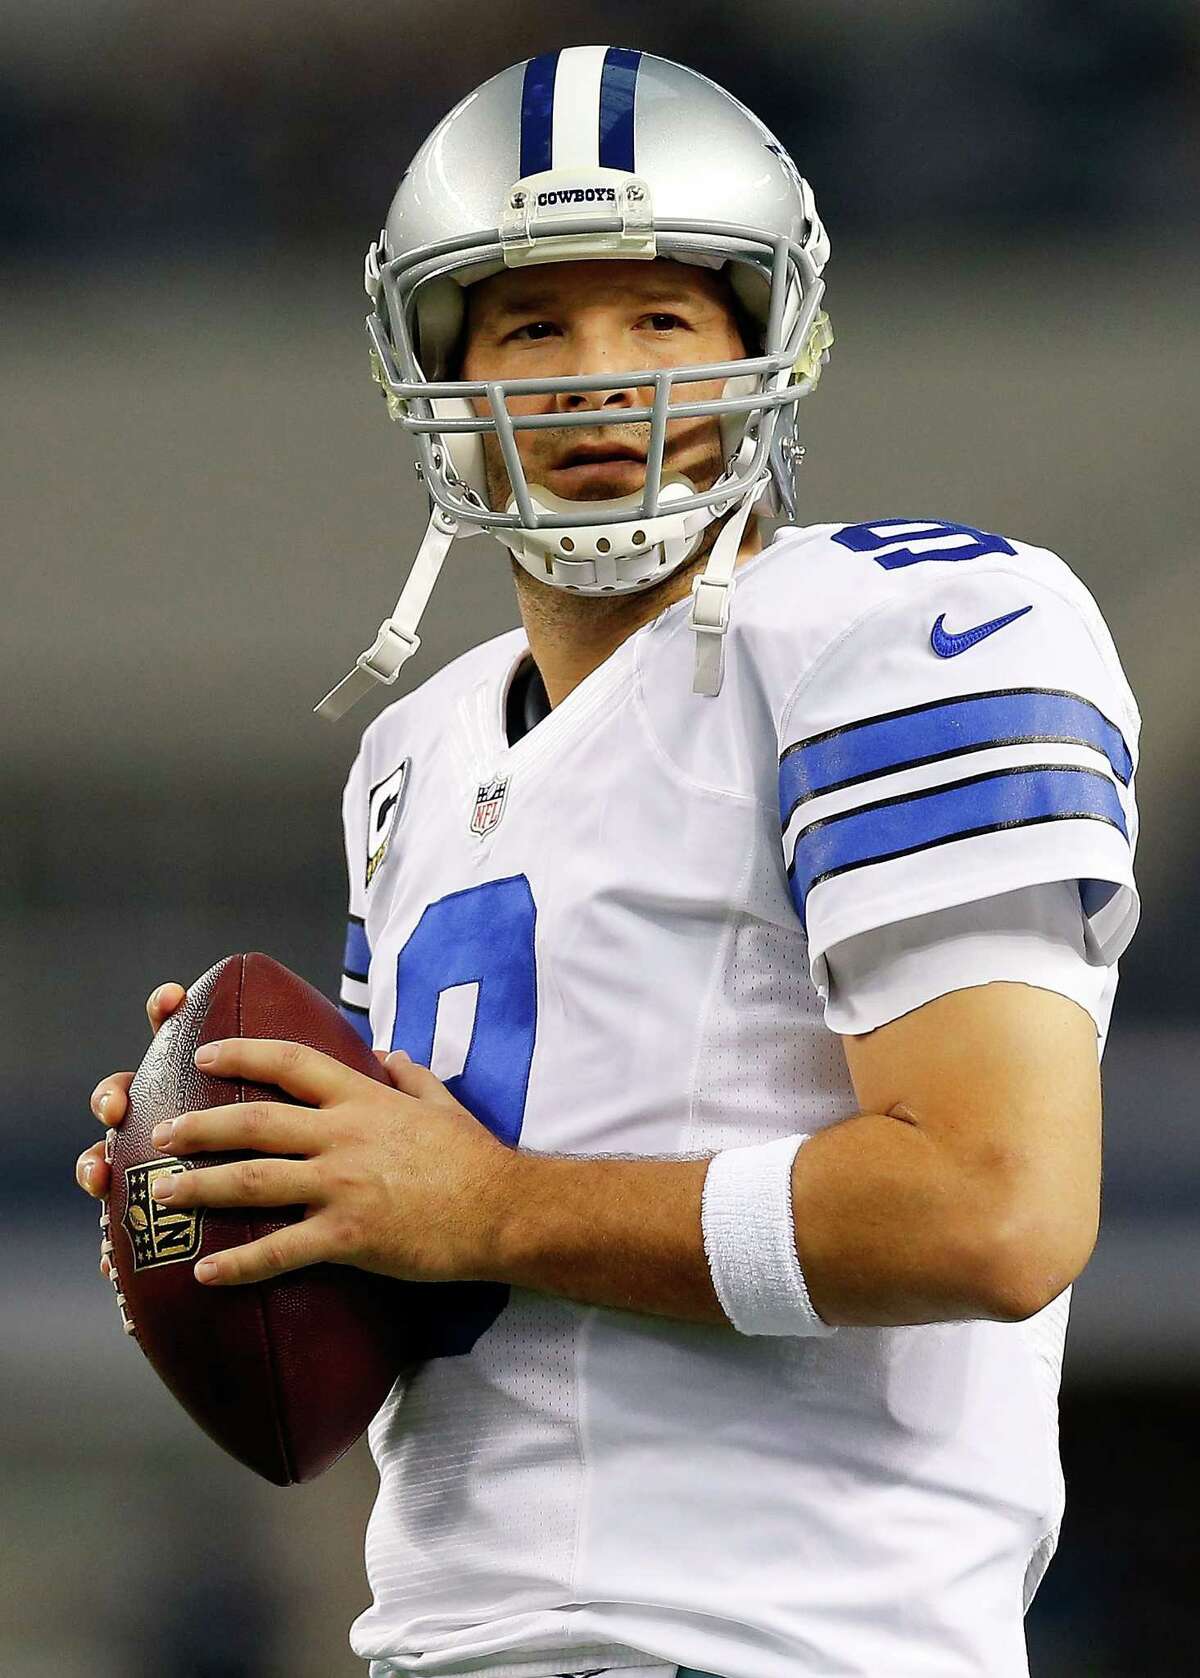 Tony Romo would have to restructure his contract to facilitate a trade.